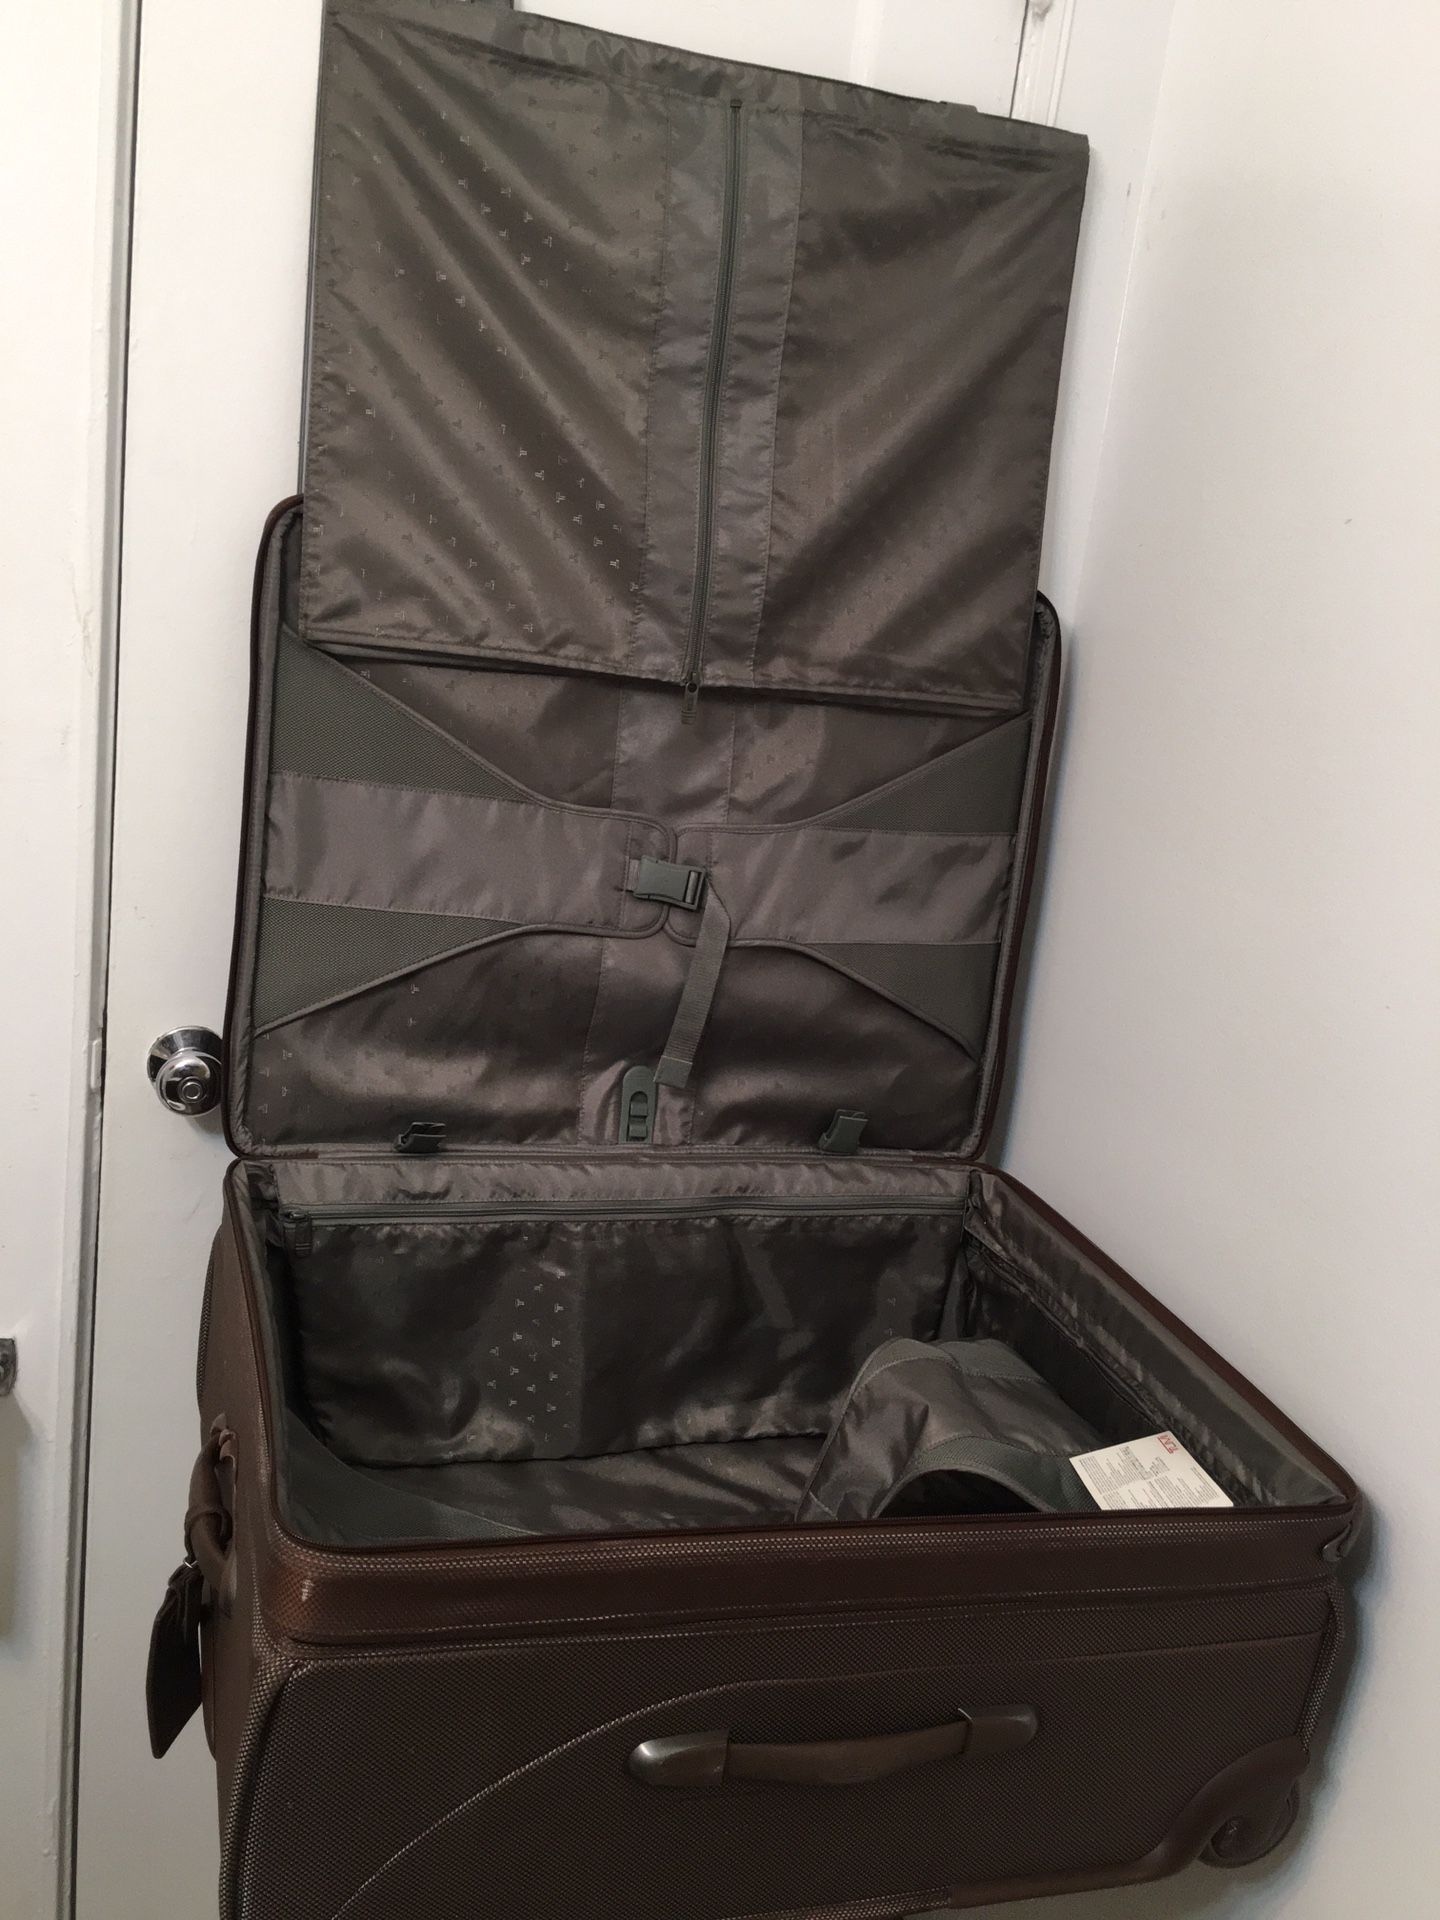 Tumi Travel Luggage  Bag with attachment of garment bag inside . Brown 26” Two Wheeled . Dimension 14x20x26.  Perfect and excellent condition and only